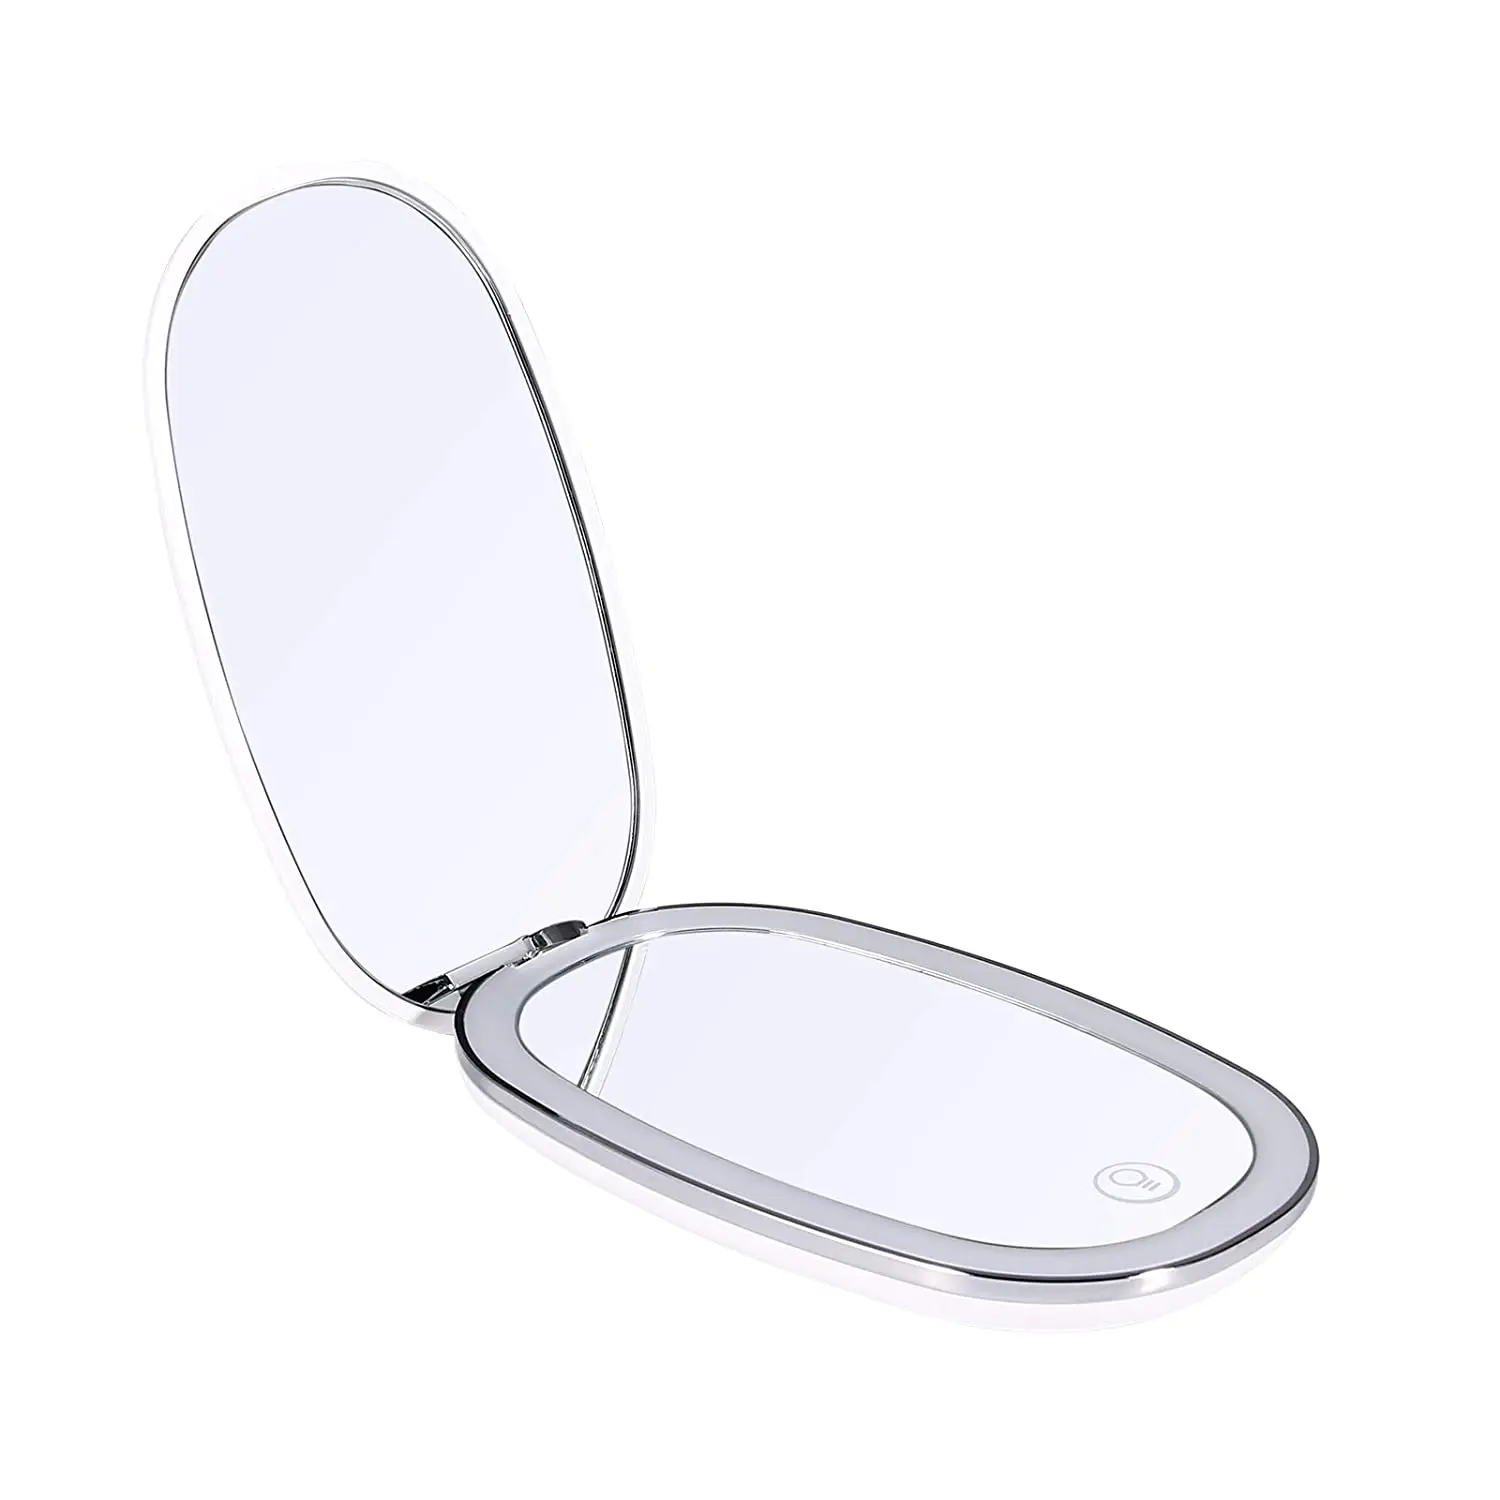 LED Lighted Travel Makeup Mirror 2X Magnification Pocket Mirror Handheld 2-Sided Mirror Type-C charge